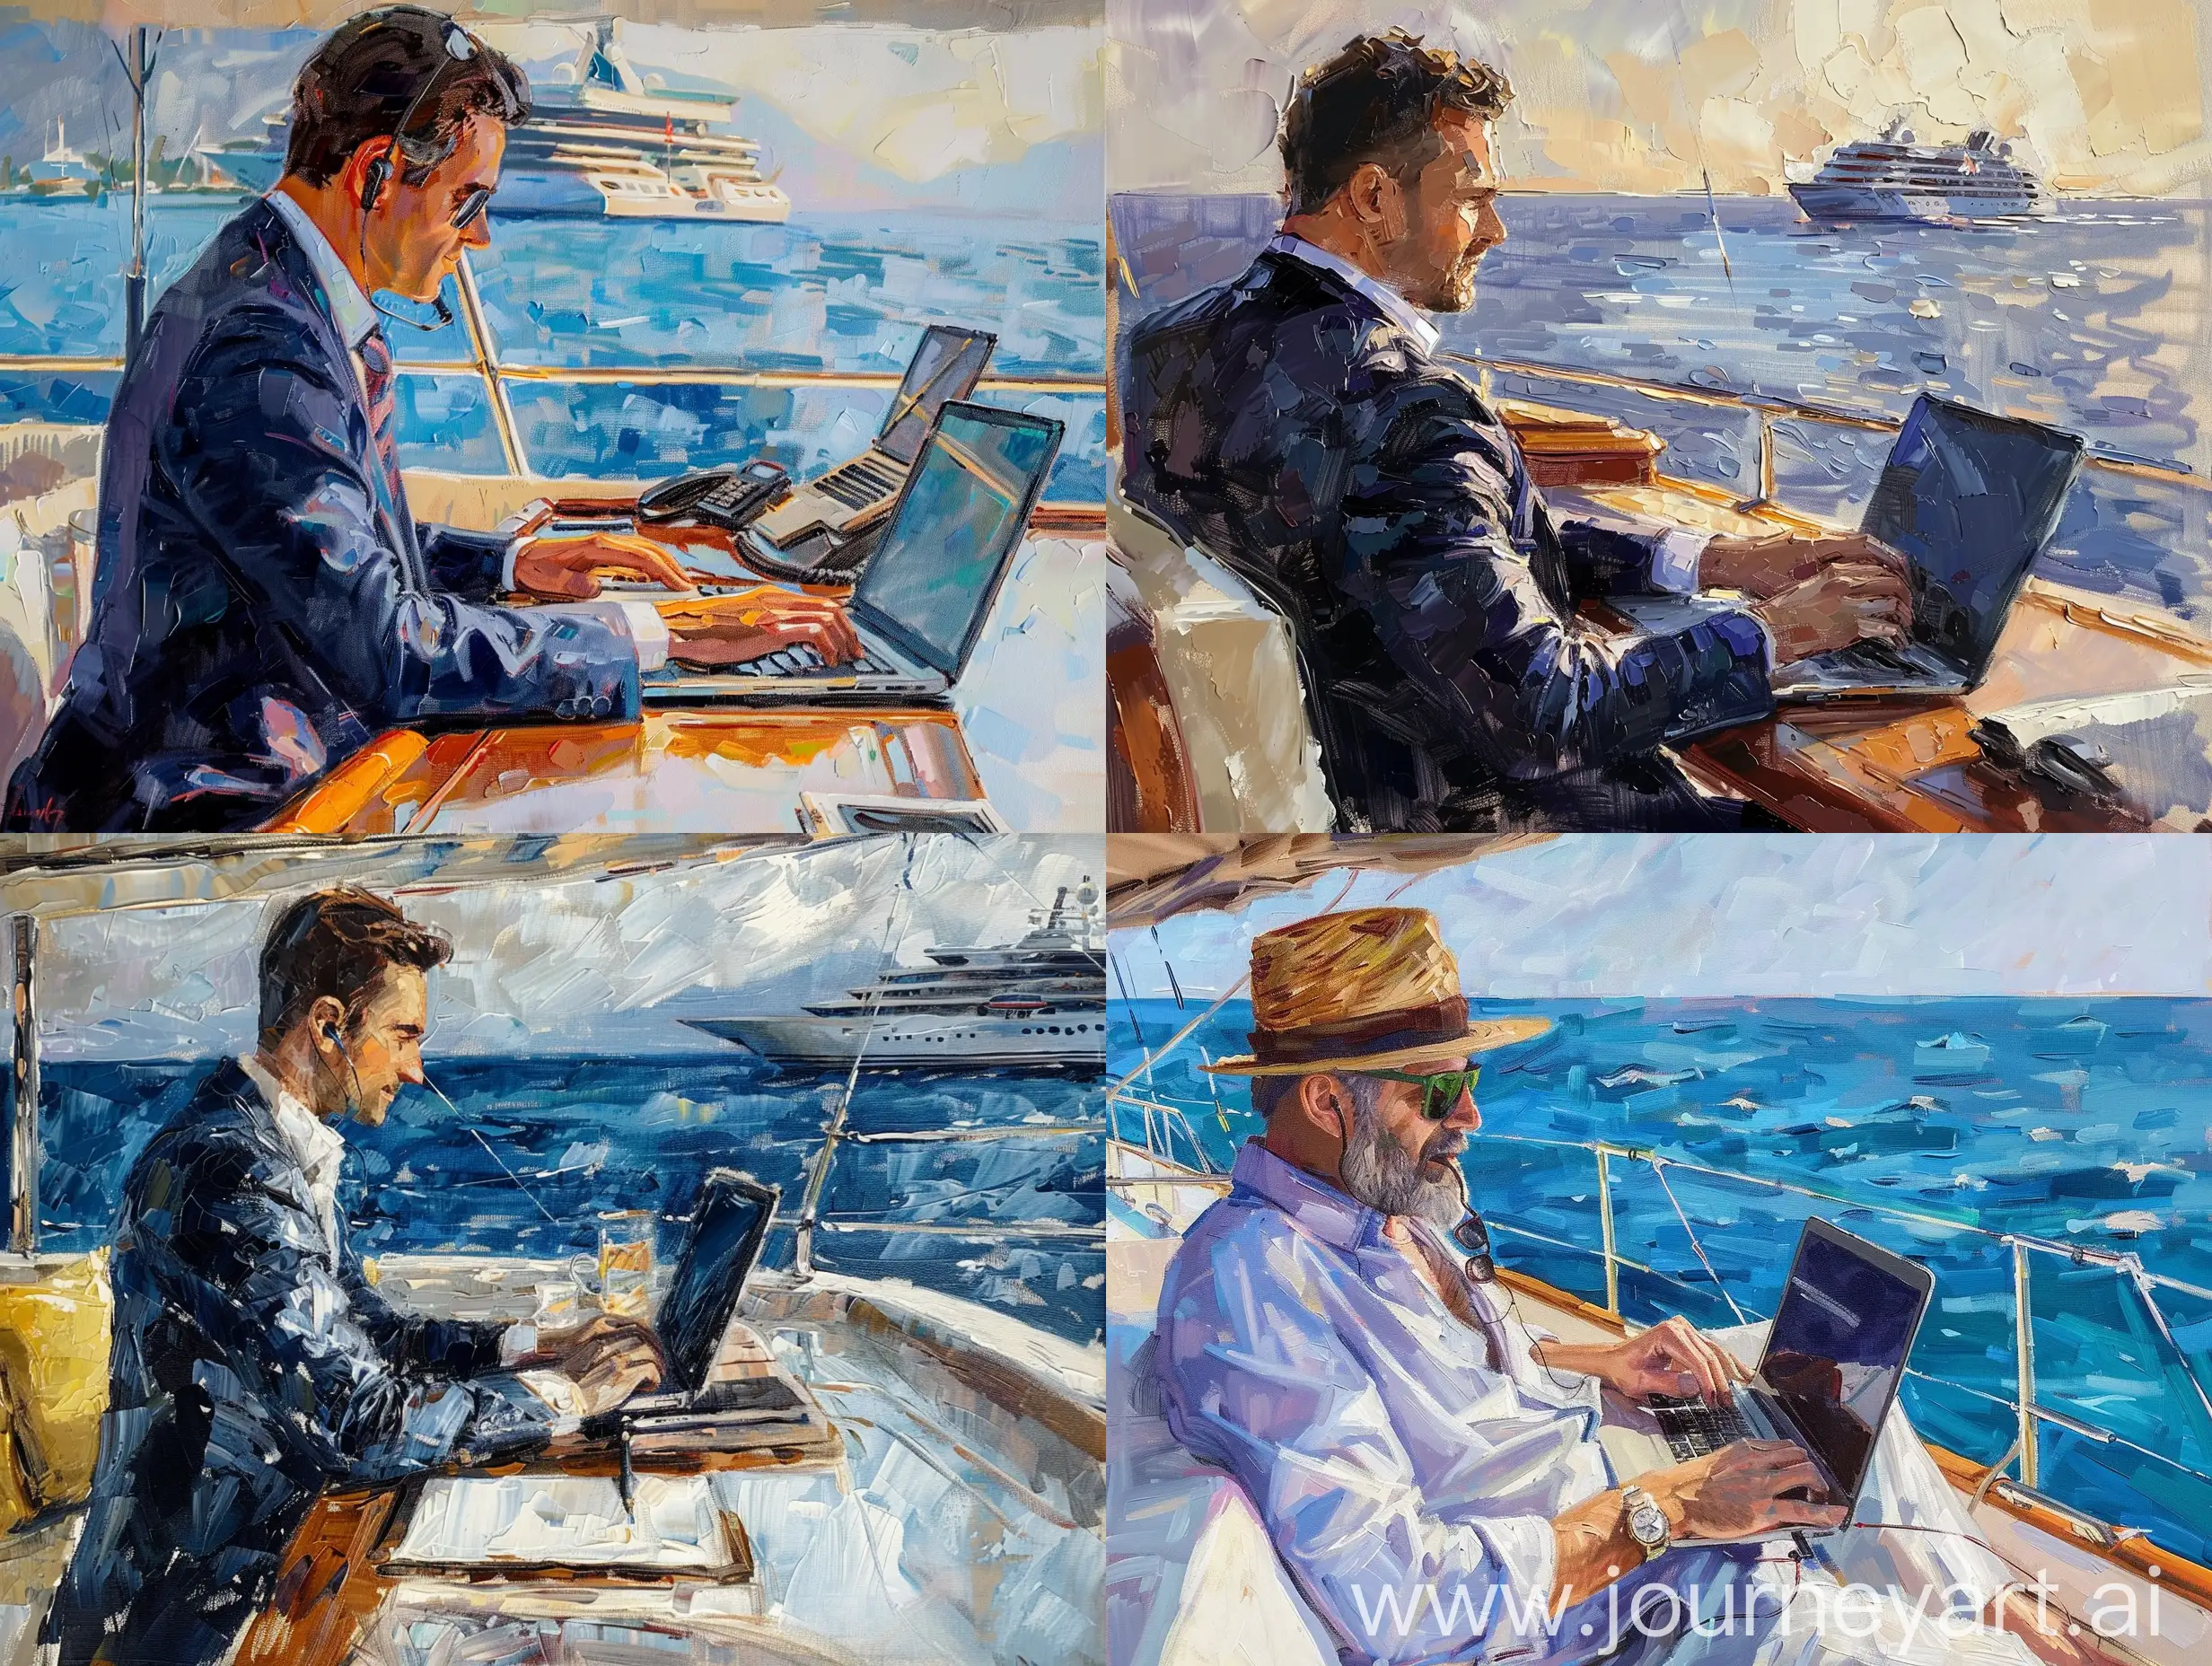 VIP bank client trading on his laptop while sitting on yacht, painting